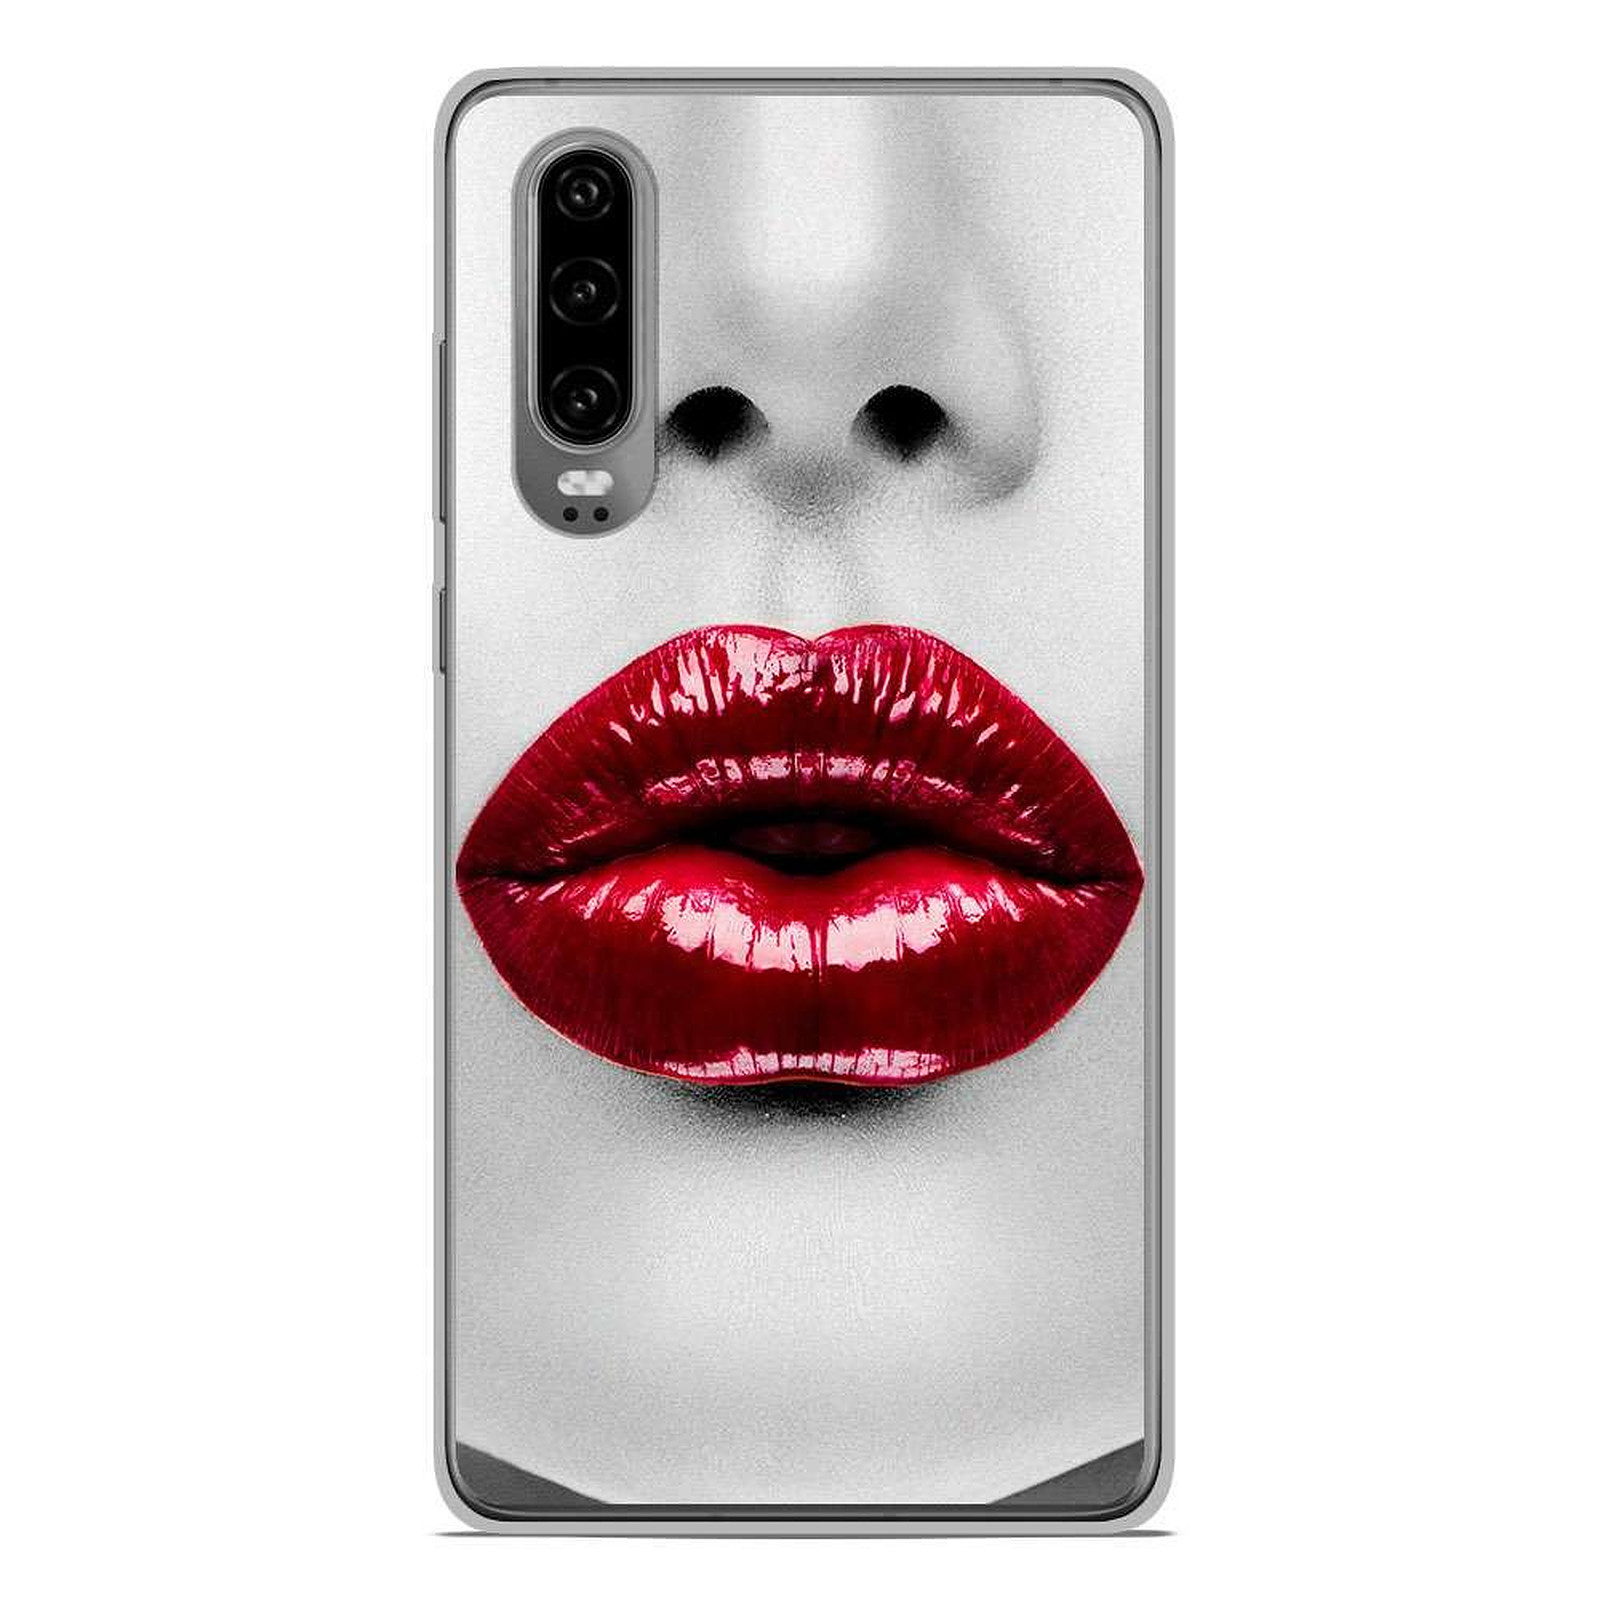 1001 Coques Coque silicone gel Huawei P30 motif Lèvres Rouges - Coque telephone 1001Coques